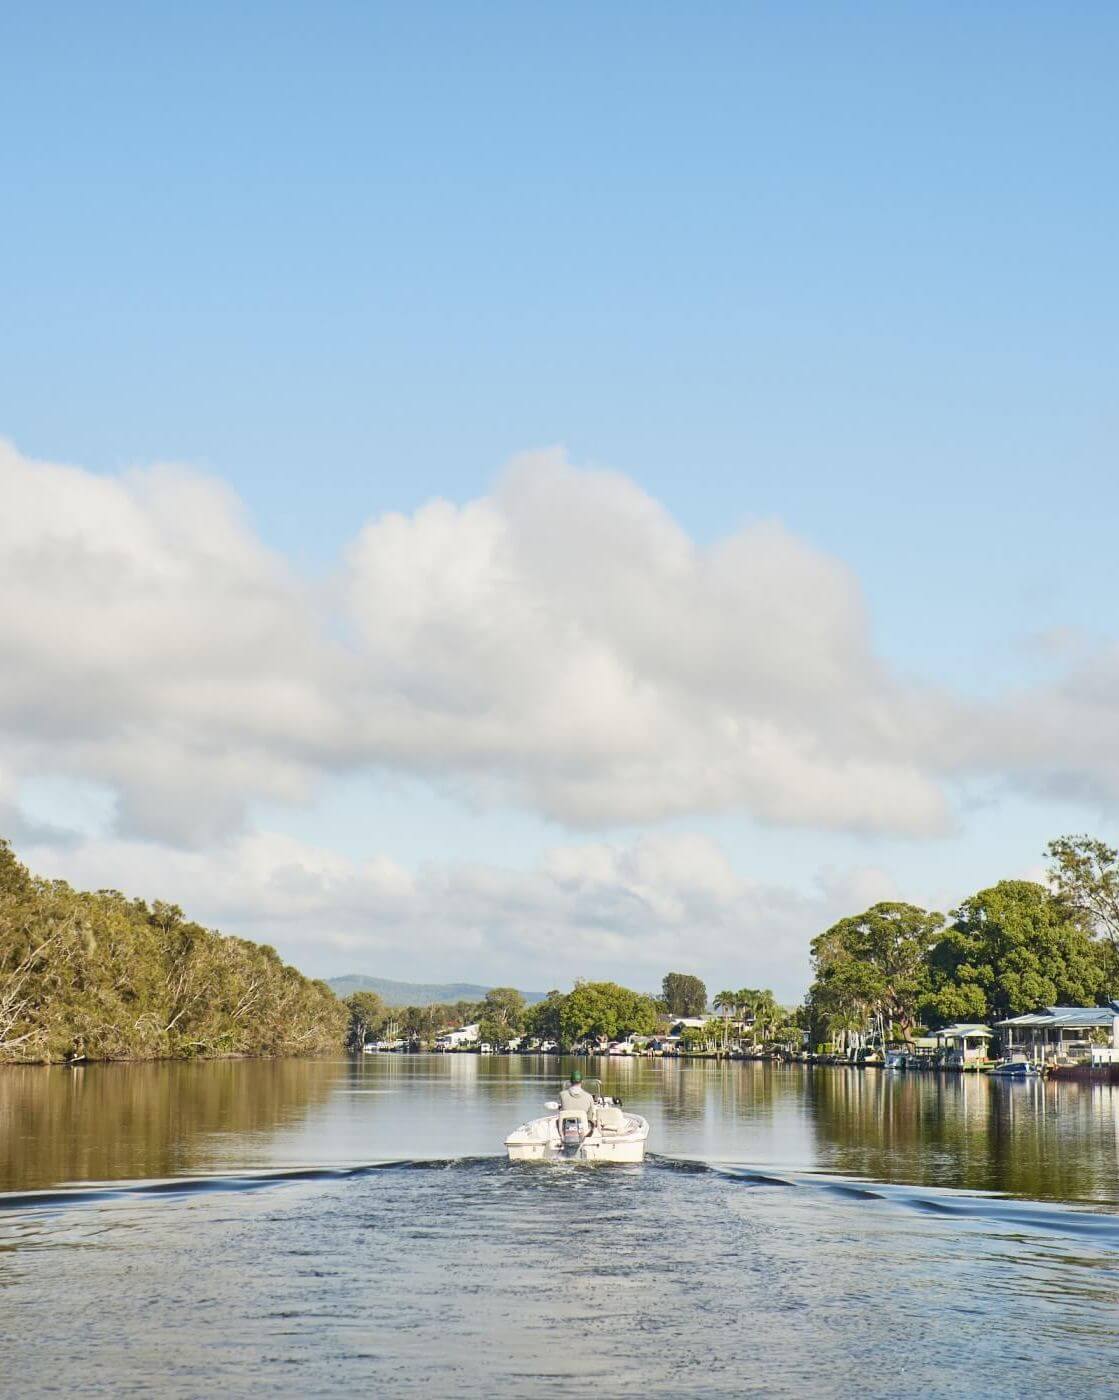 Ourimbah Creek boat ride Central Coast image by David Ross